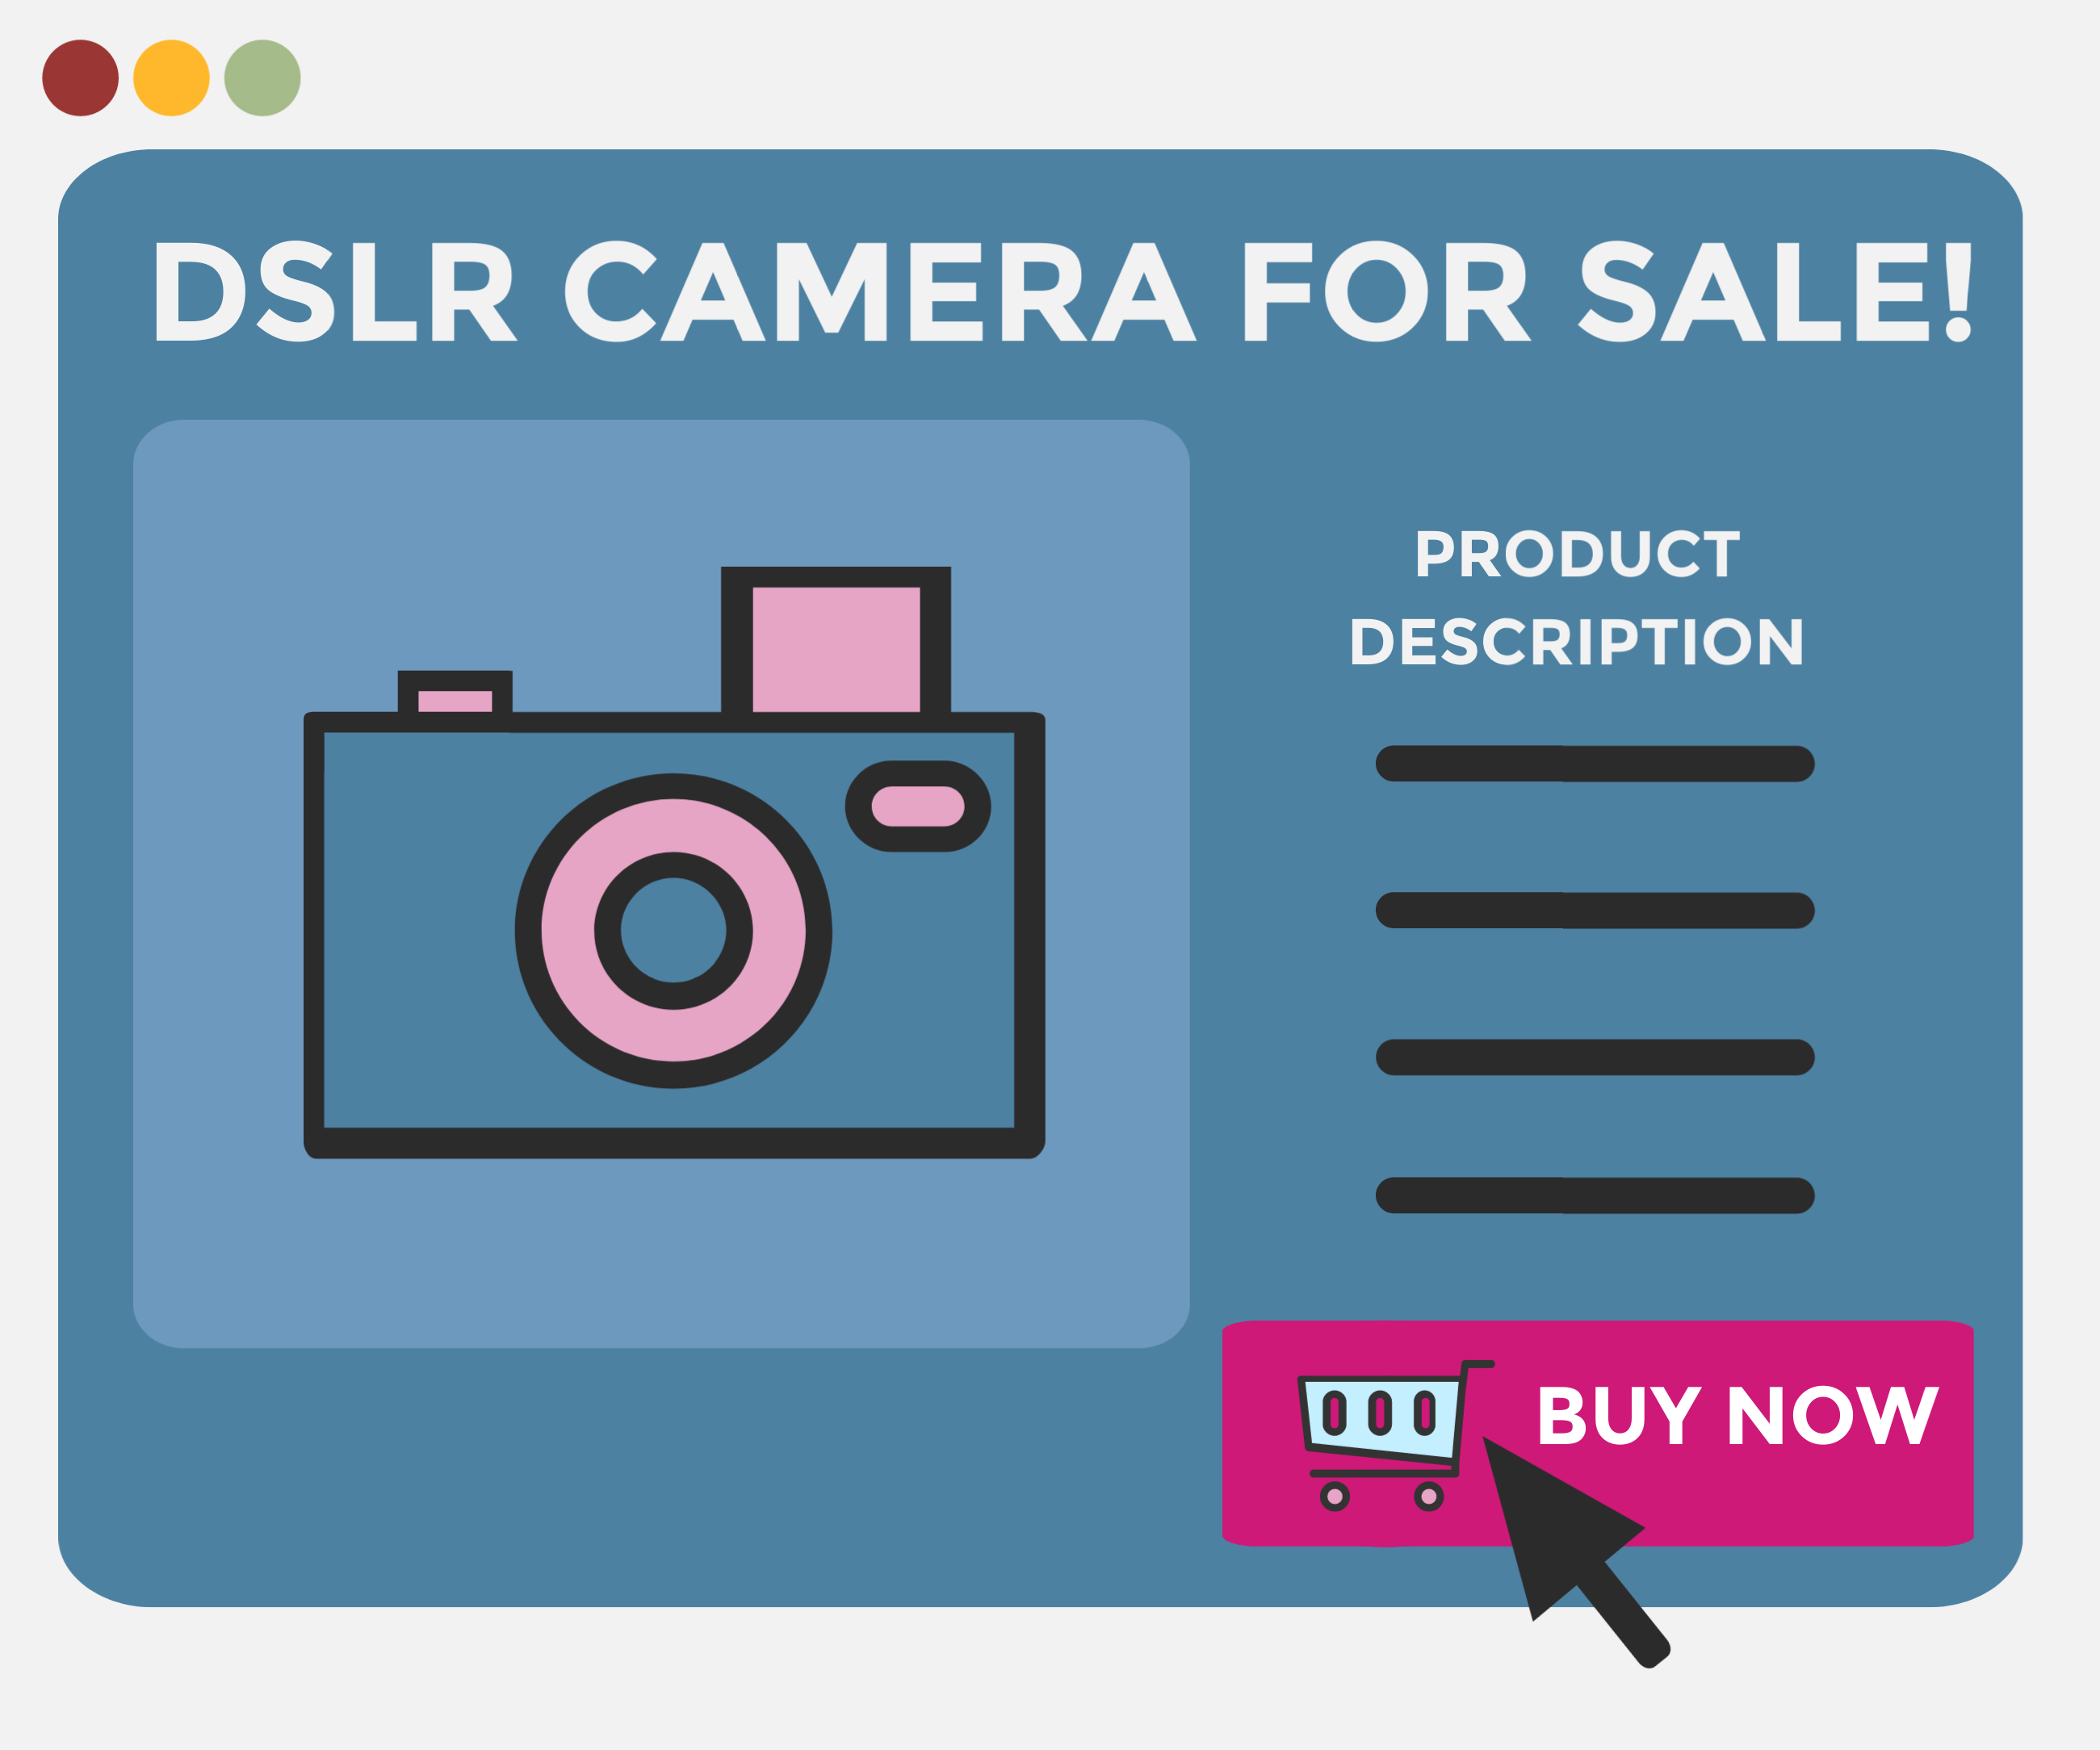 A good camera product description always leads to an increase in sales conversion ContentWriters